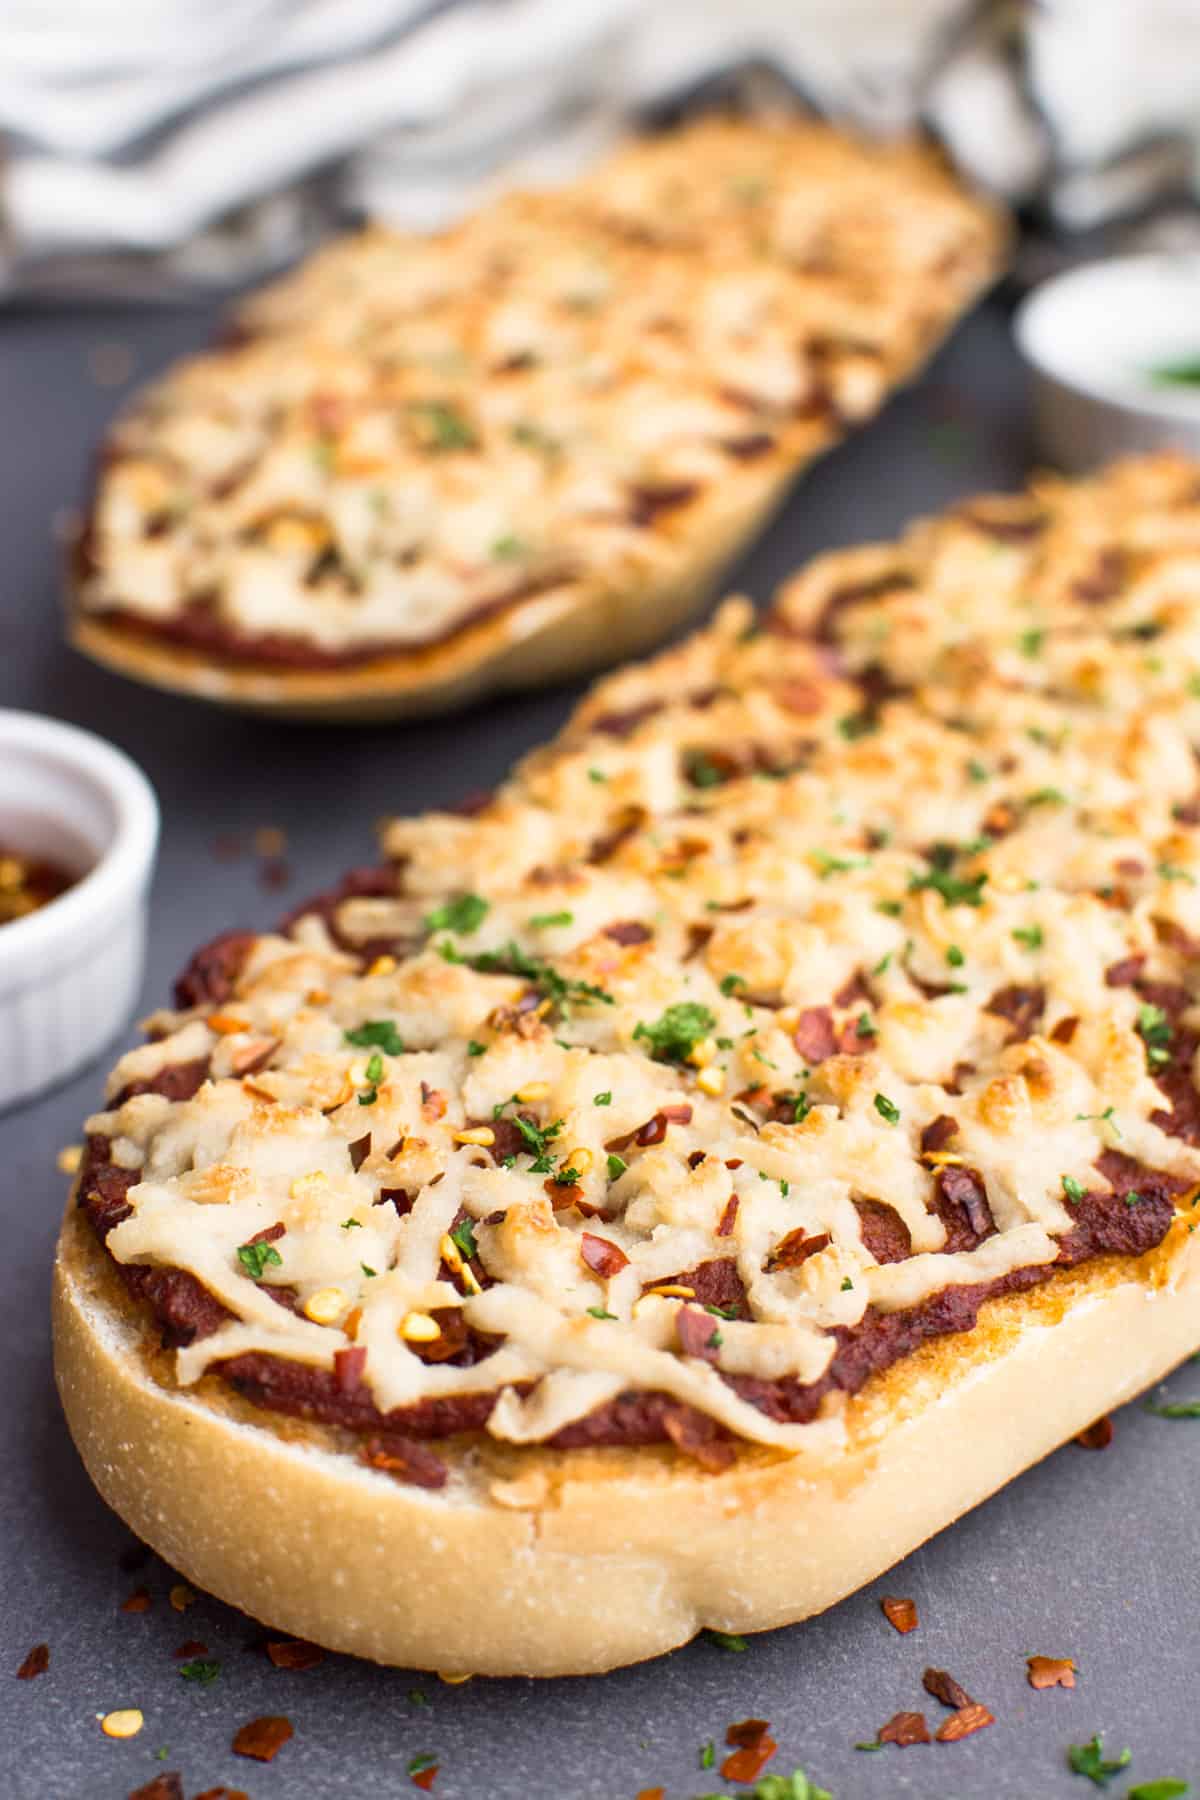 French bread pizza topped with shredded vegan cheese.